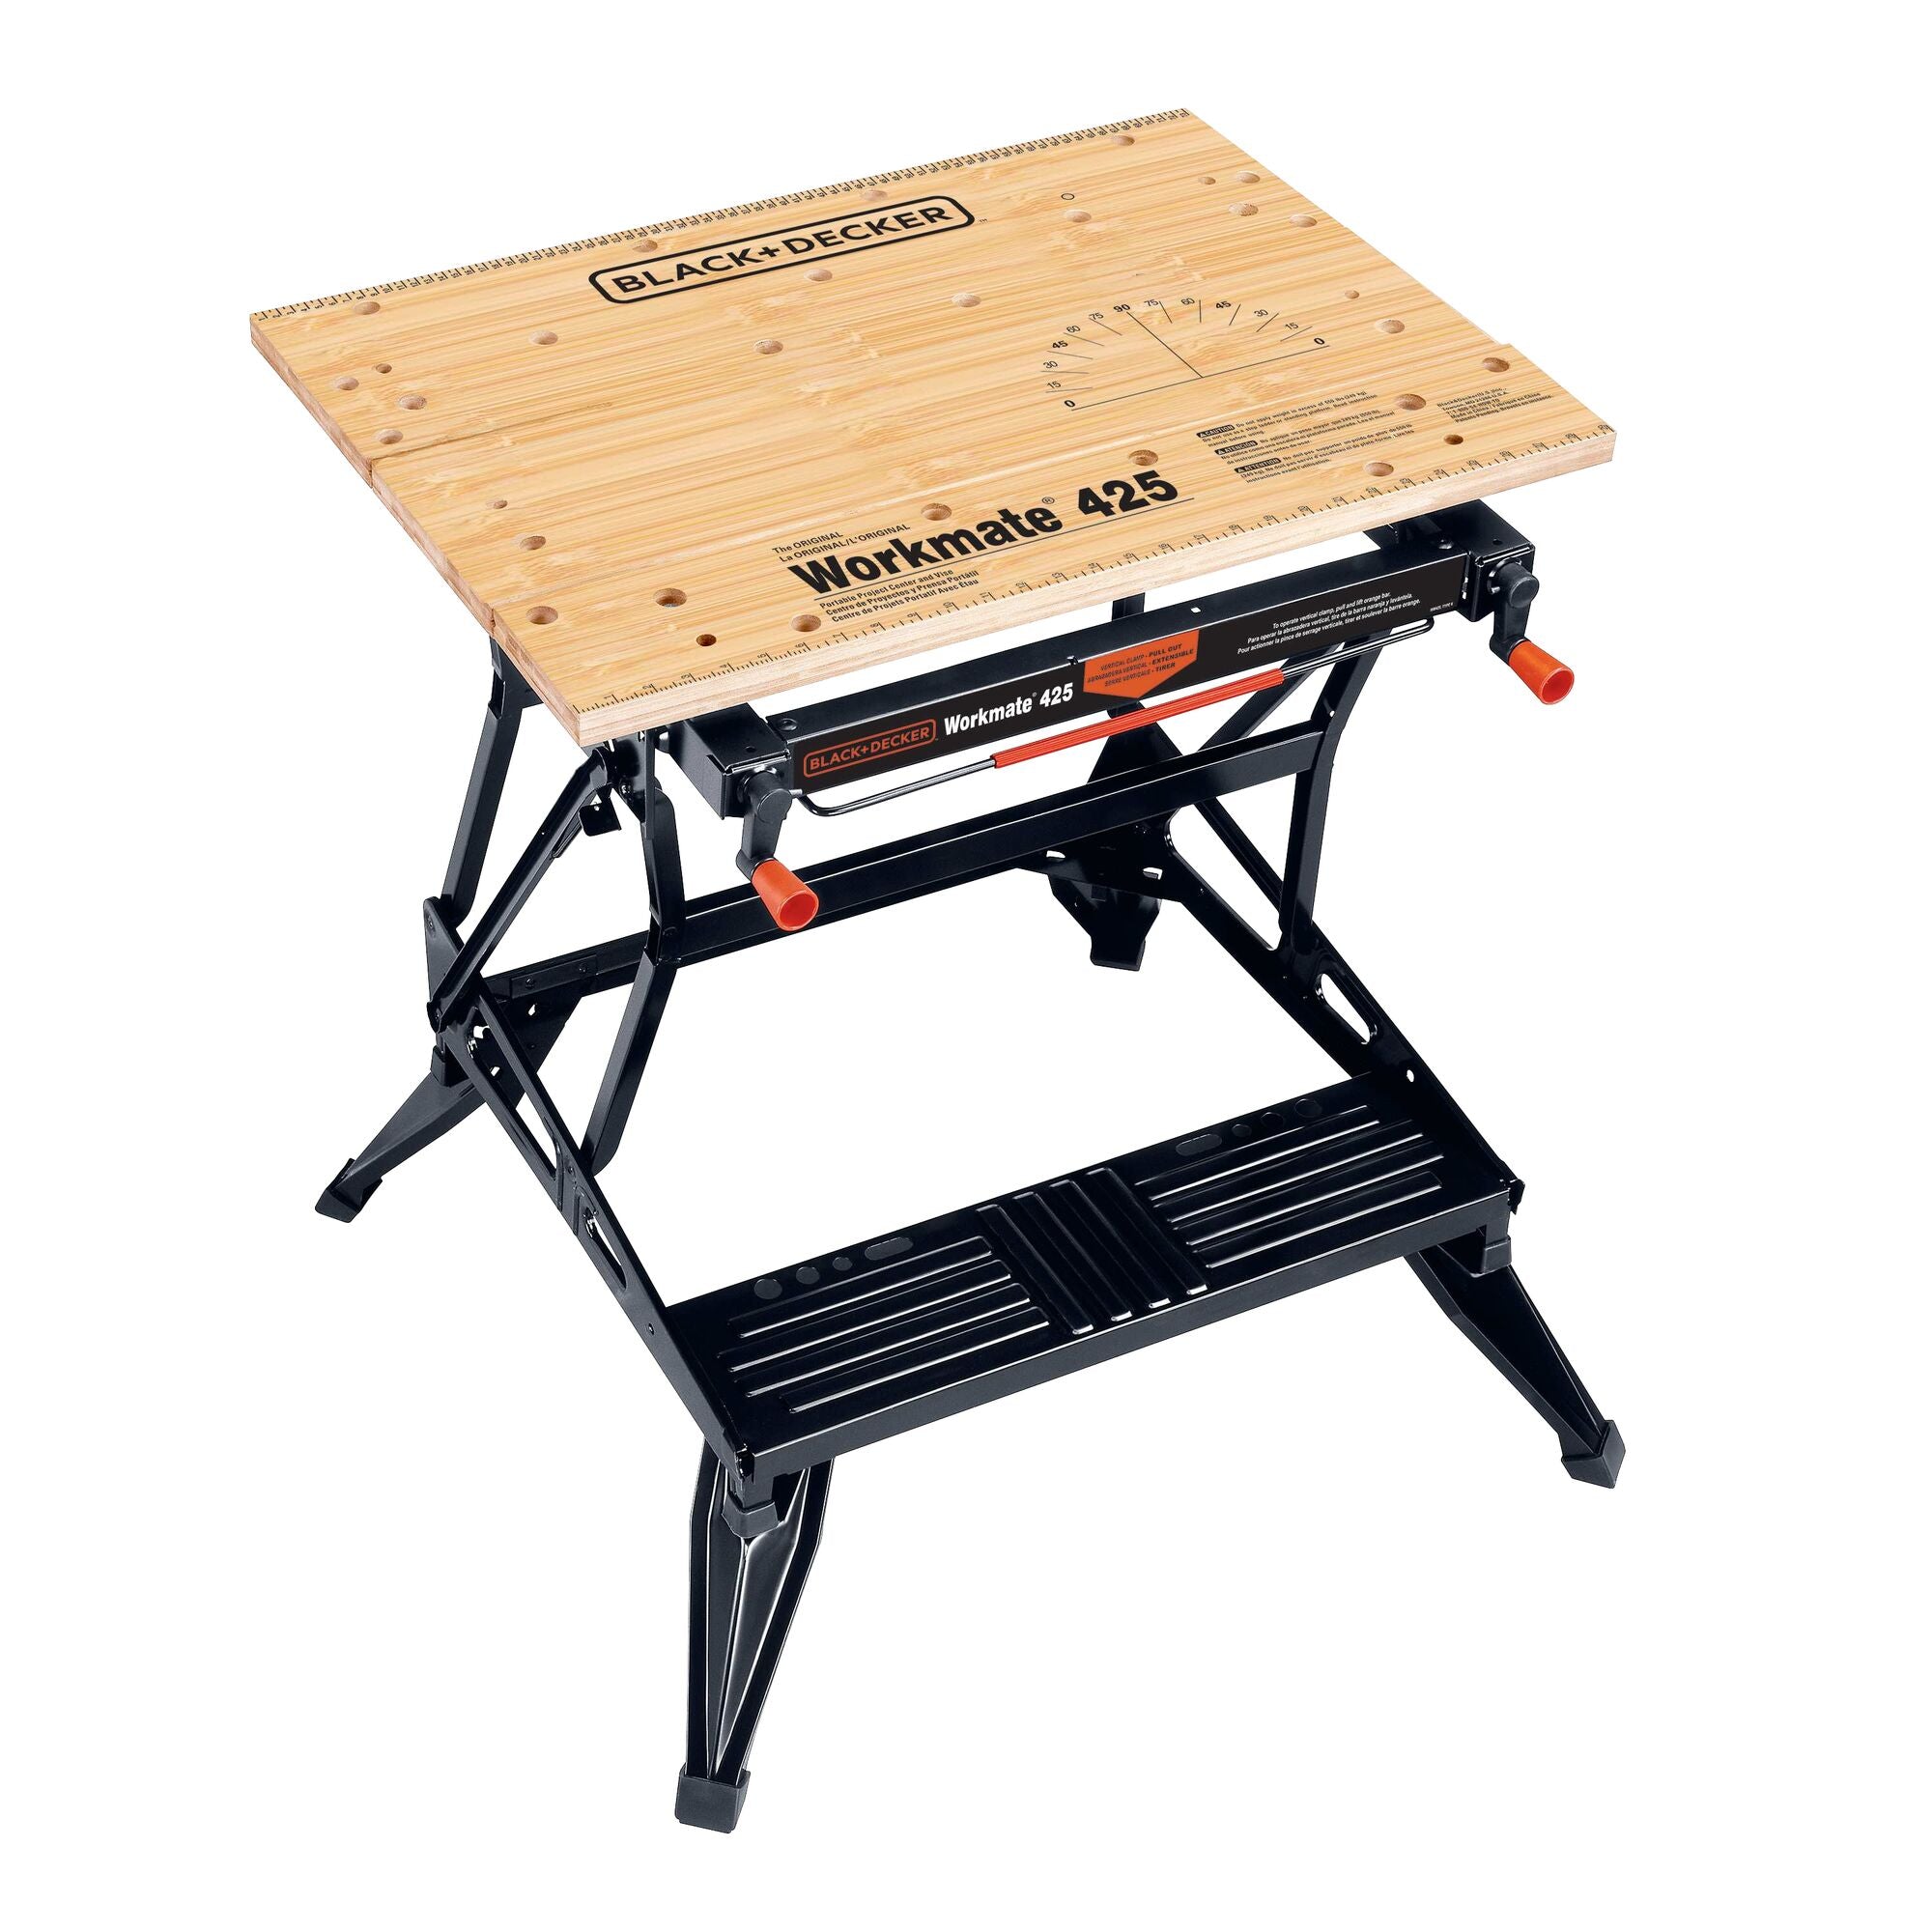 A close view of the BLACK+DECKER Workmate™ Portable Workbench contains working equipment.